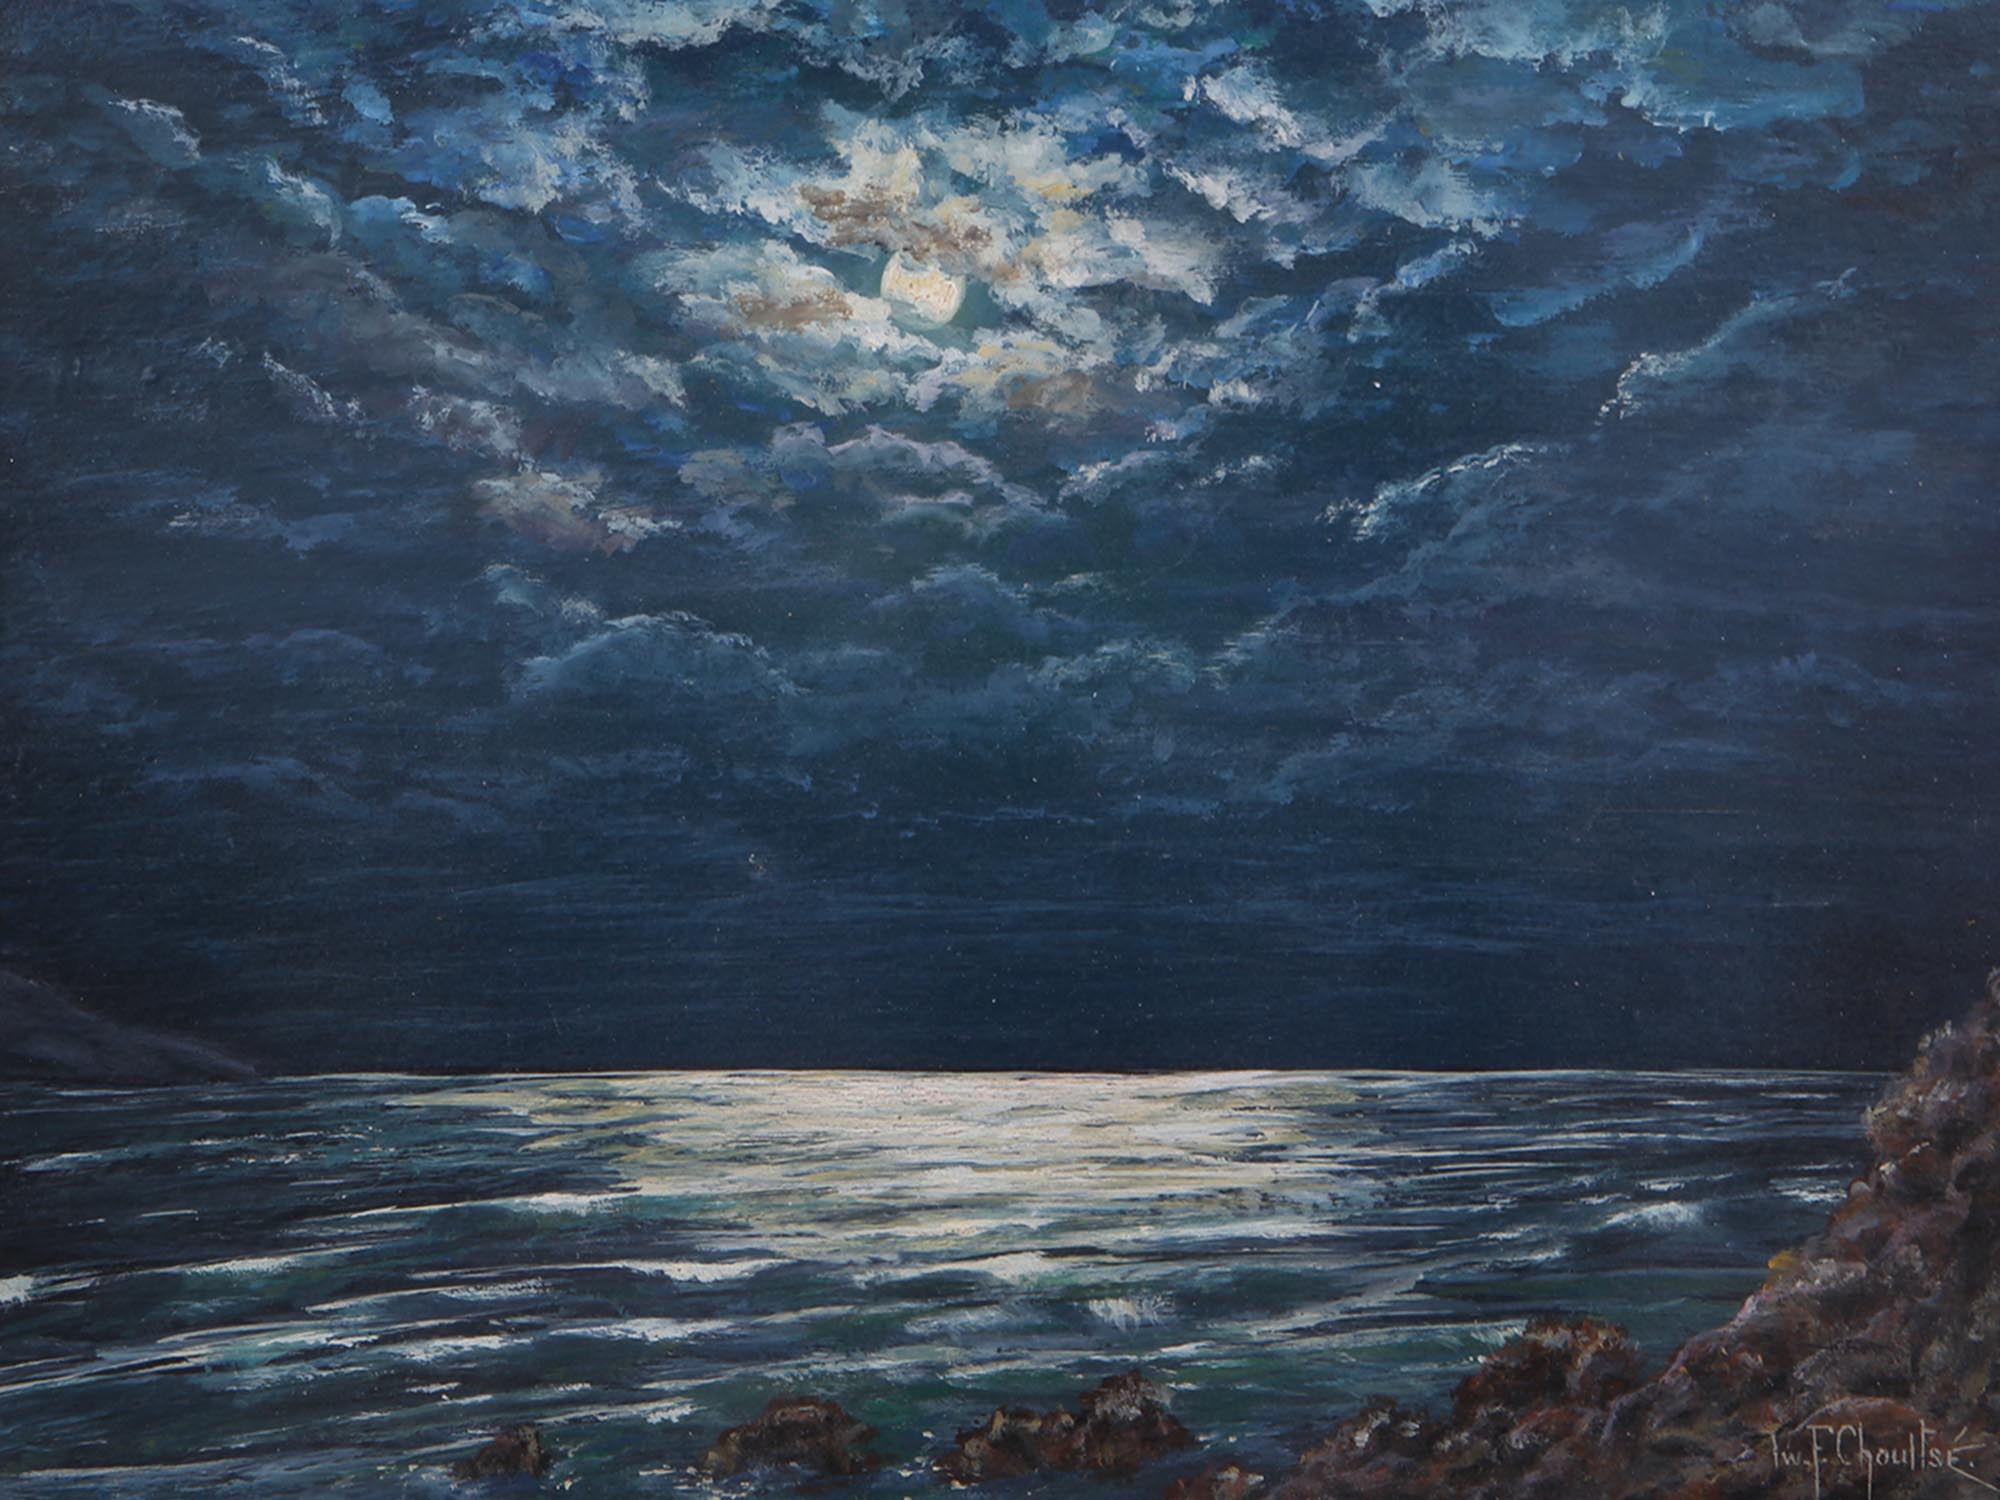 RUSSIAN OIL PAINTING SEASCAPE BY IVAN F CHOULTSE PIC-1